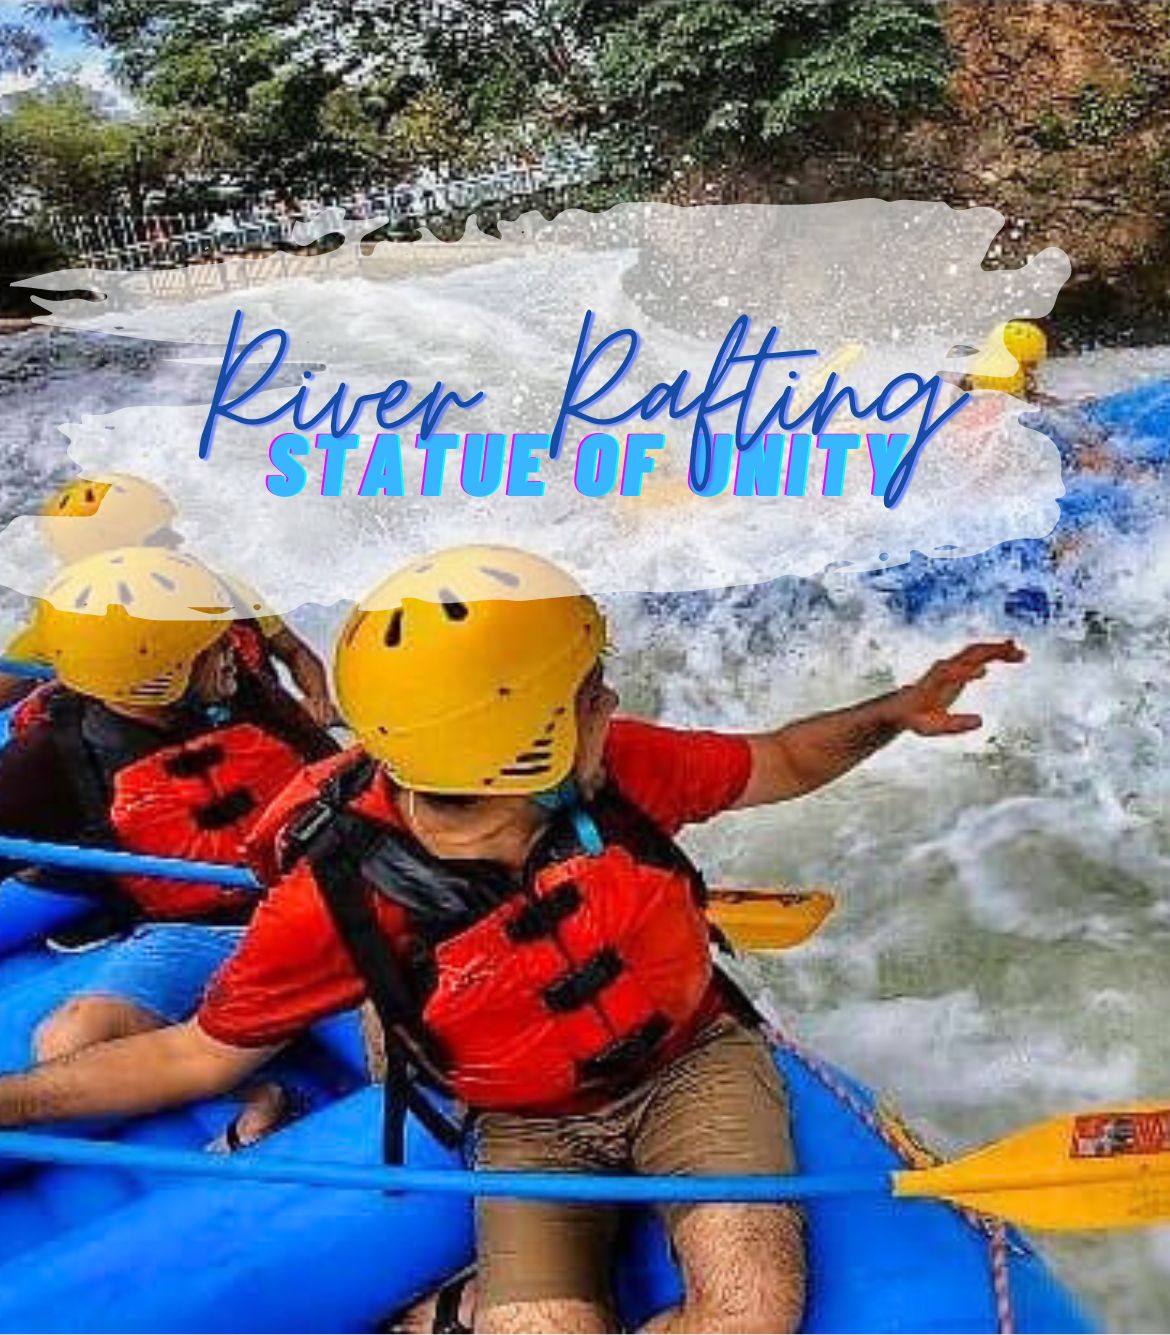 River Rafting Statue of Unity